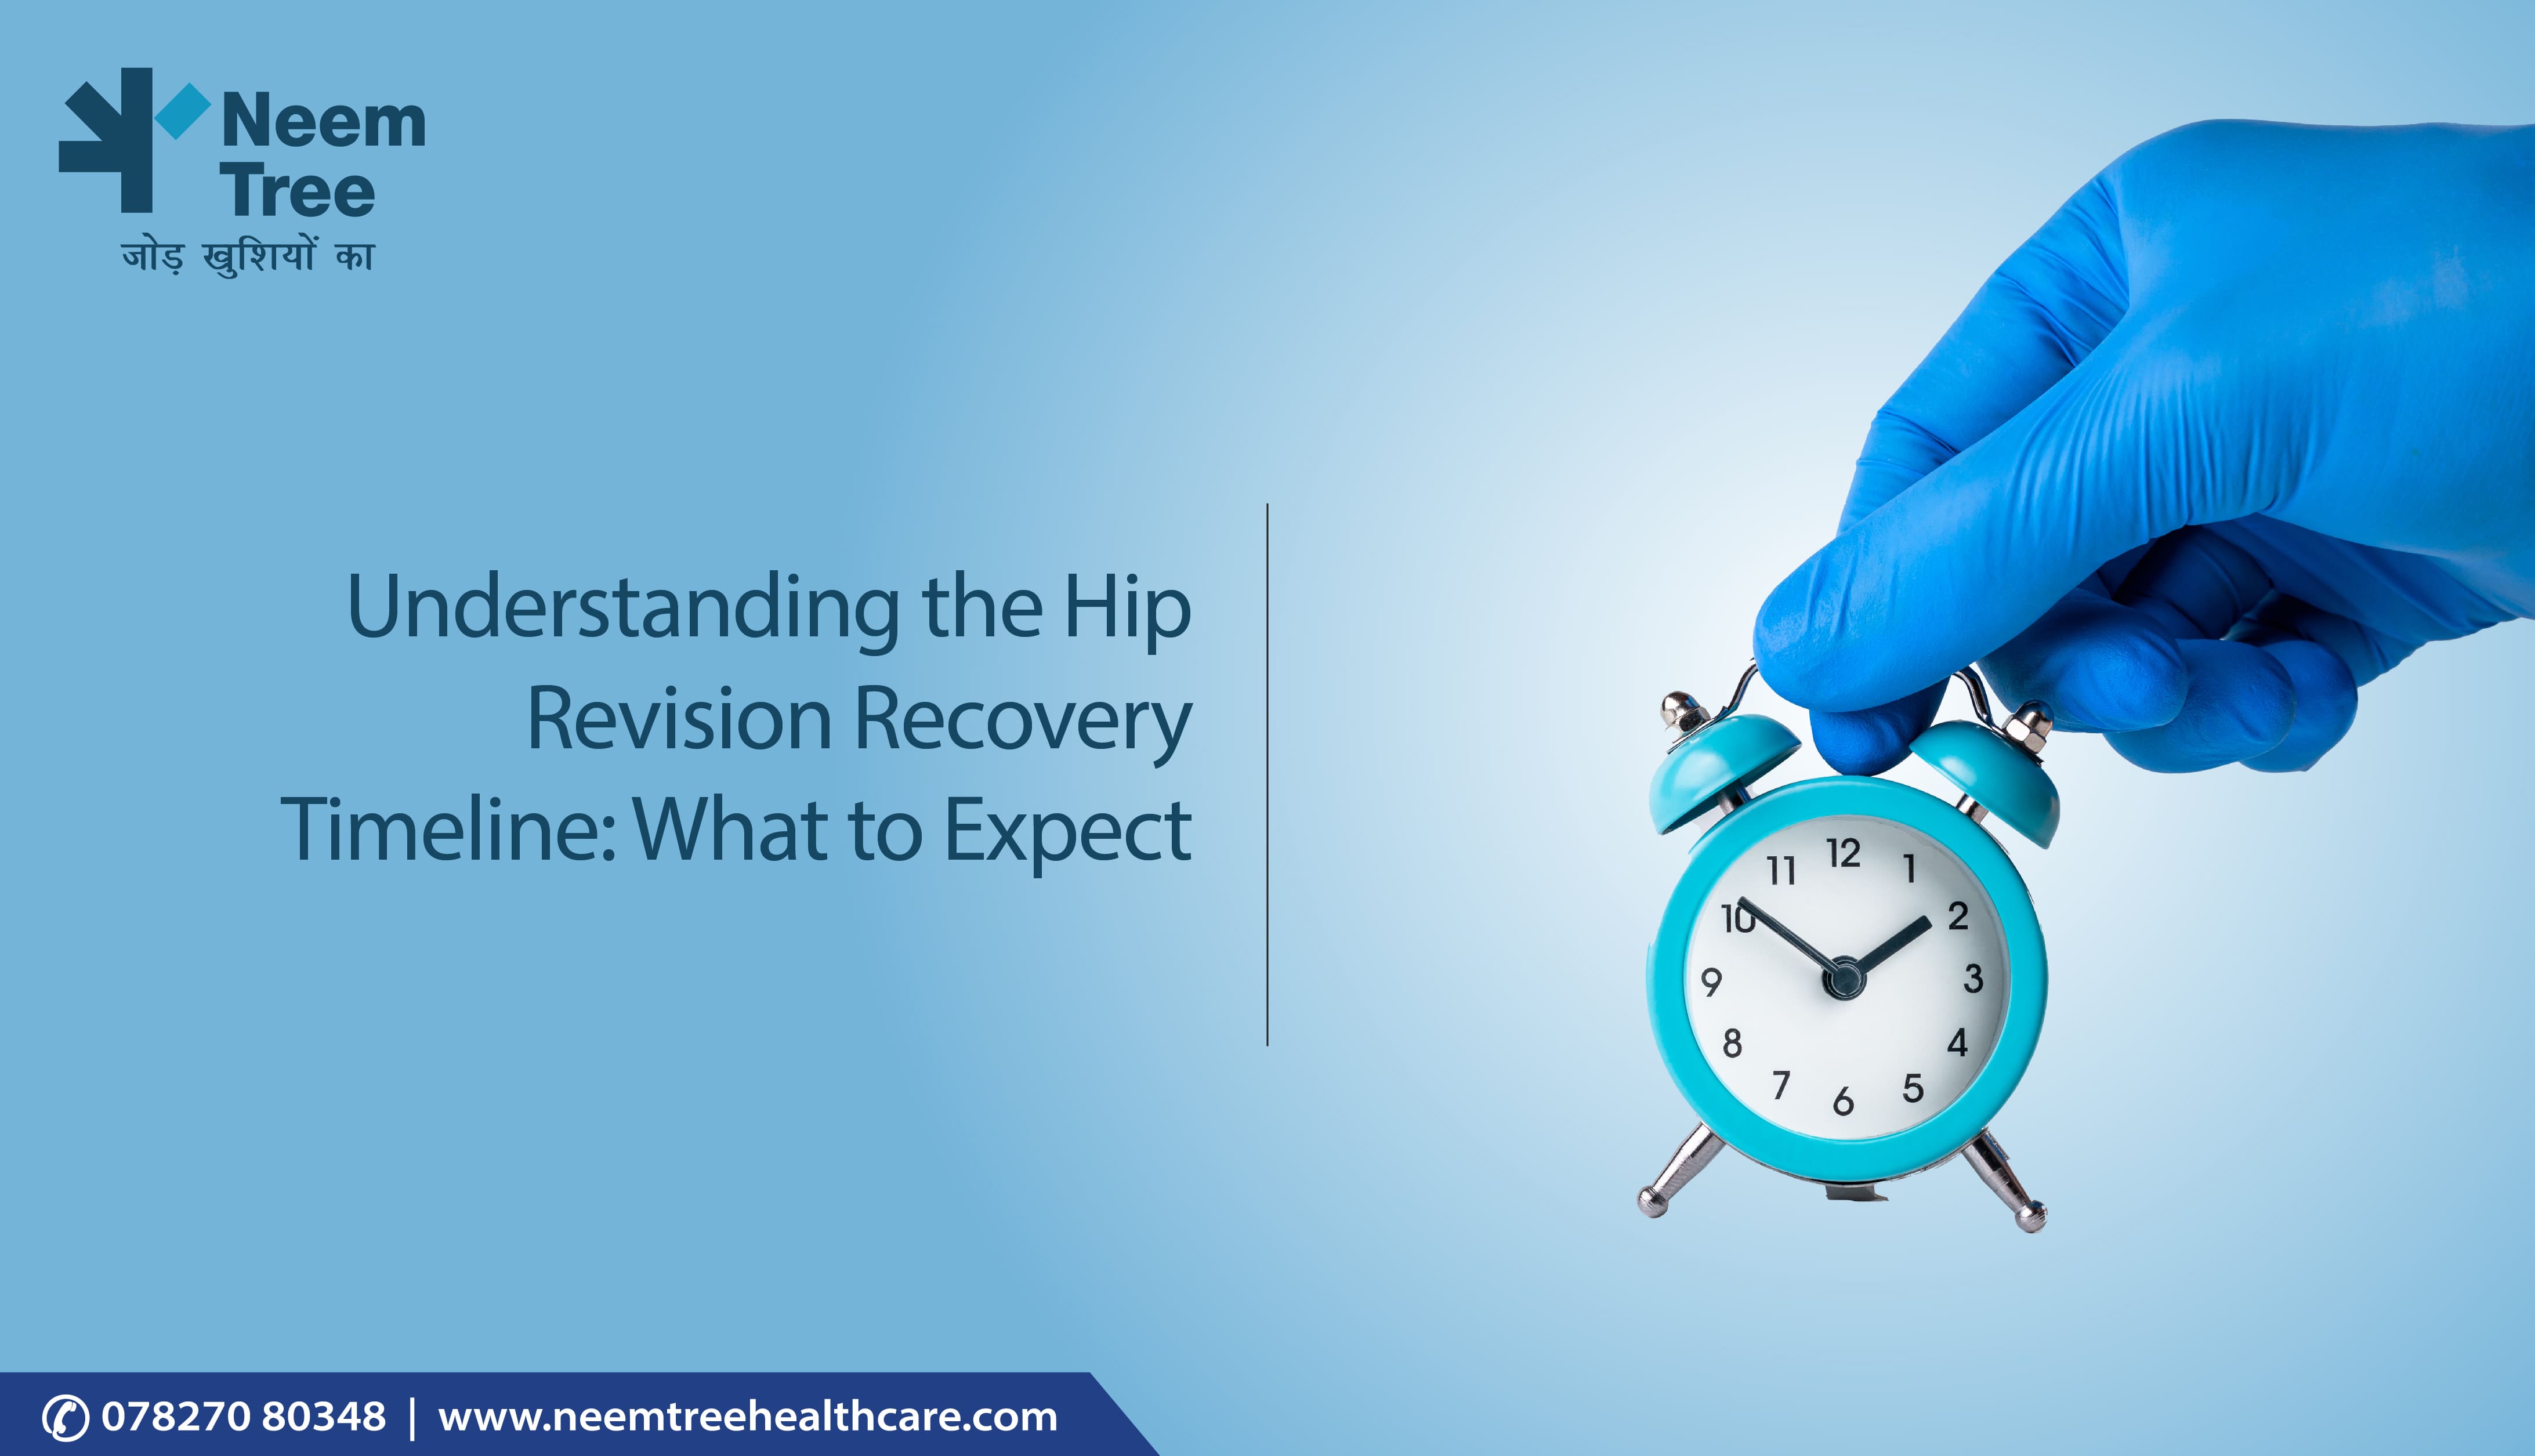 Understanding the Hip Revision Recovery Timeline: What to Expect